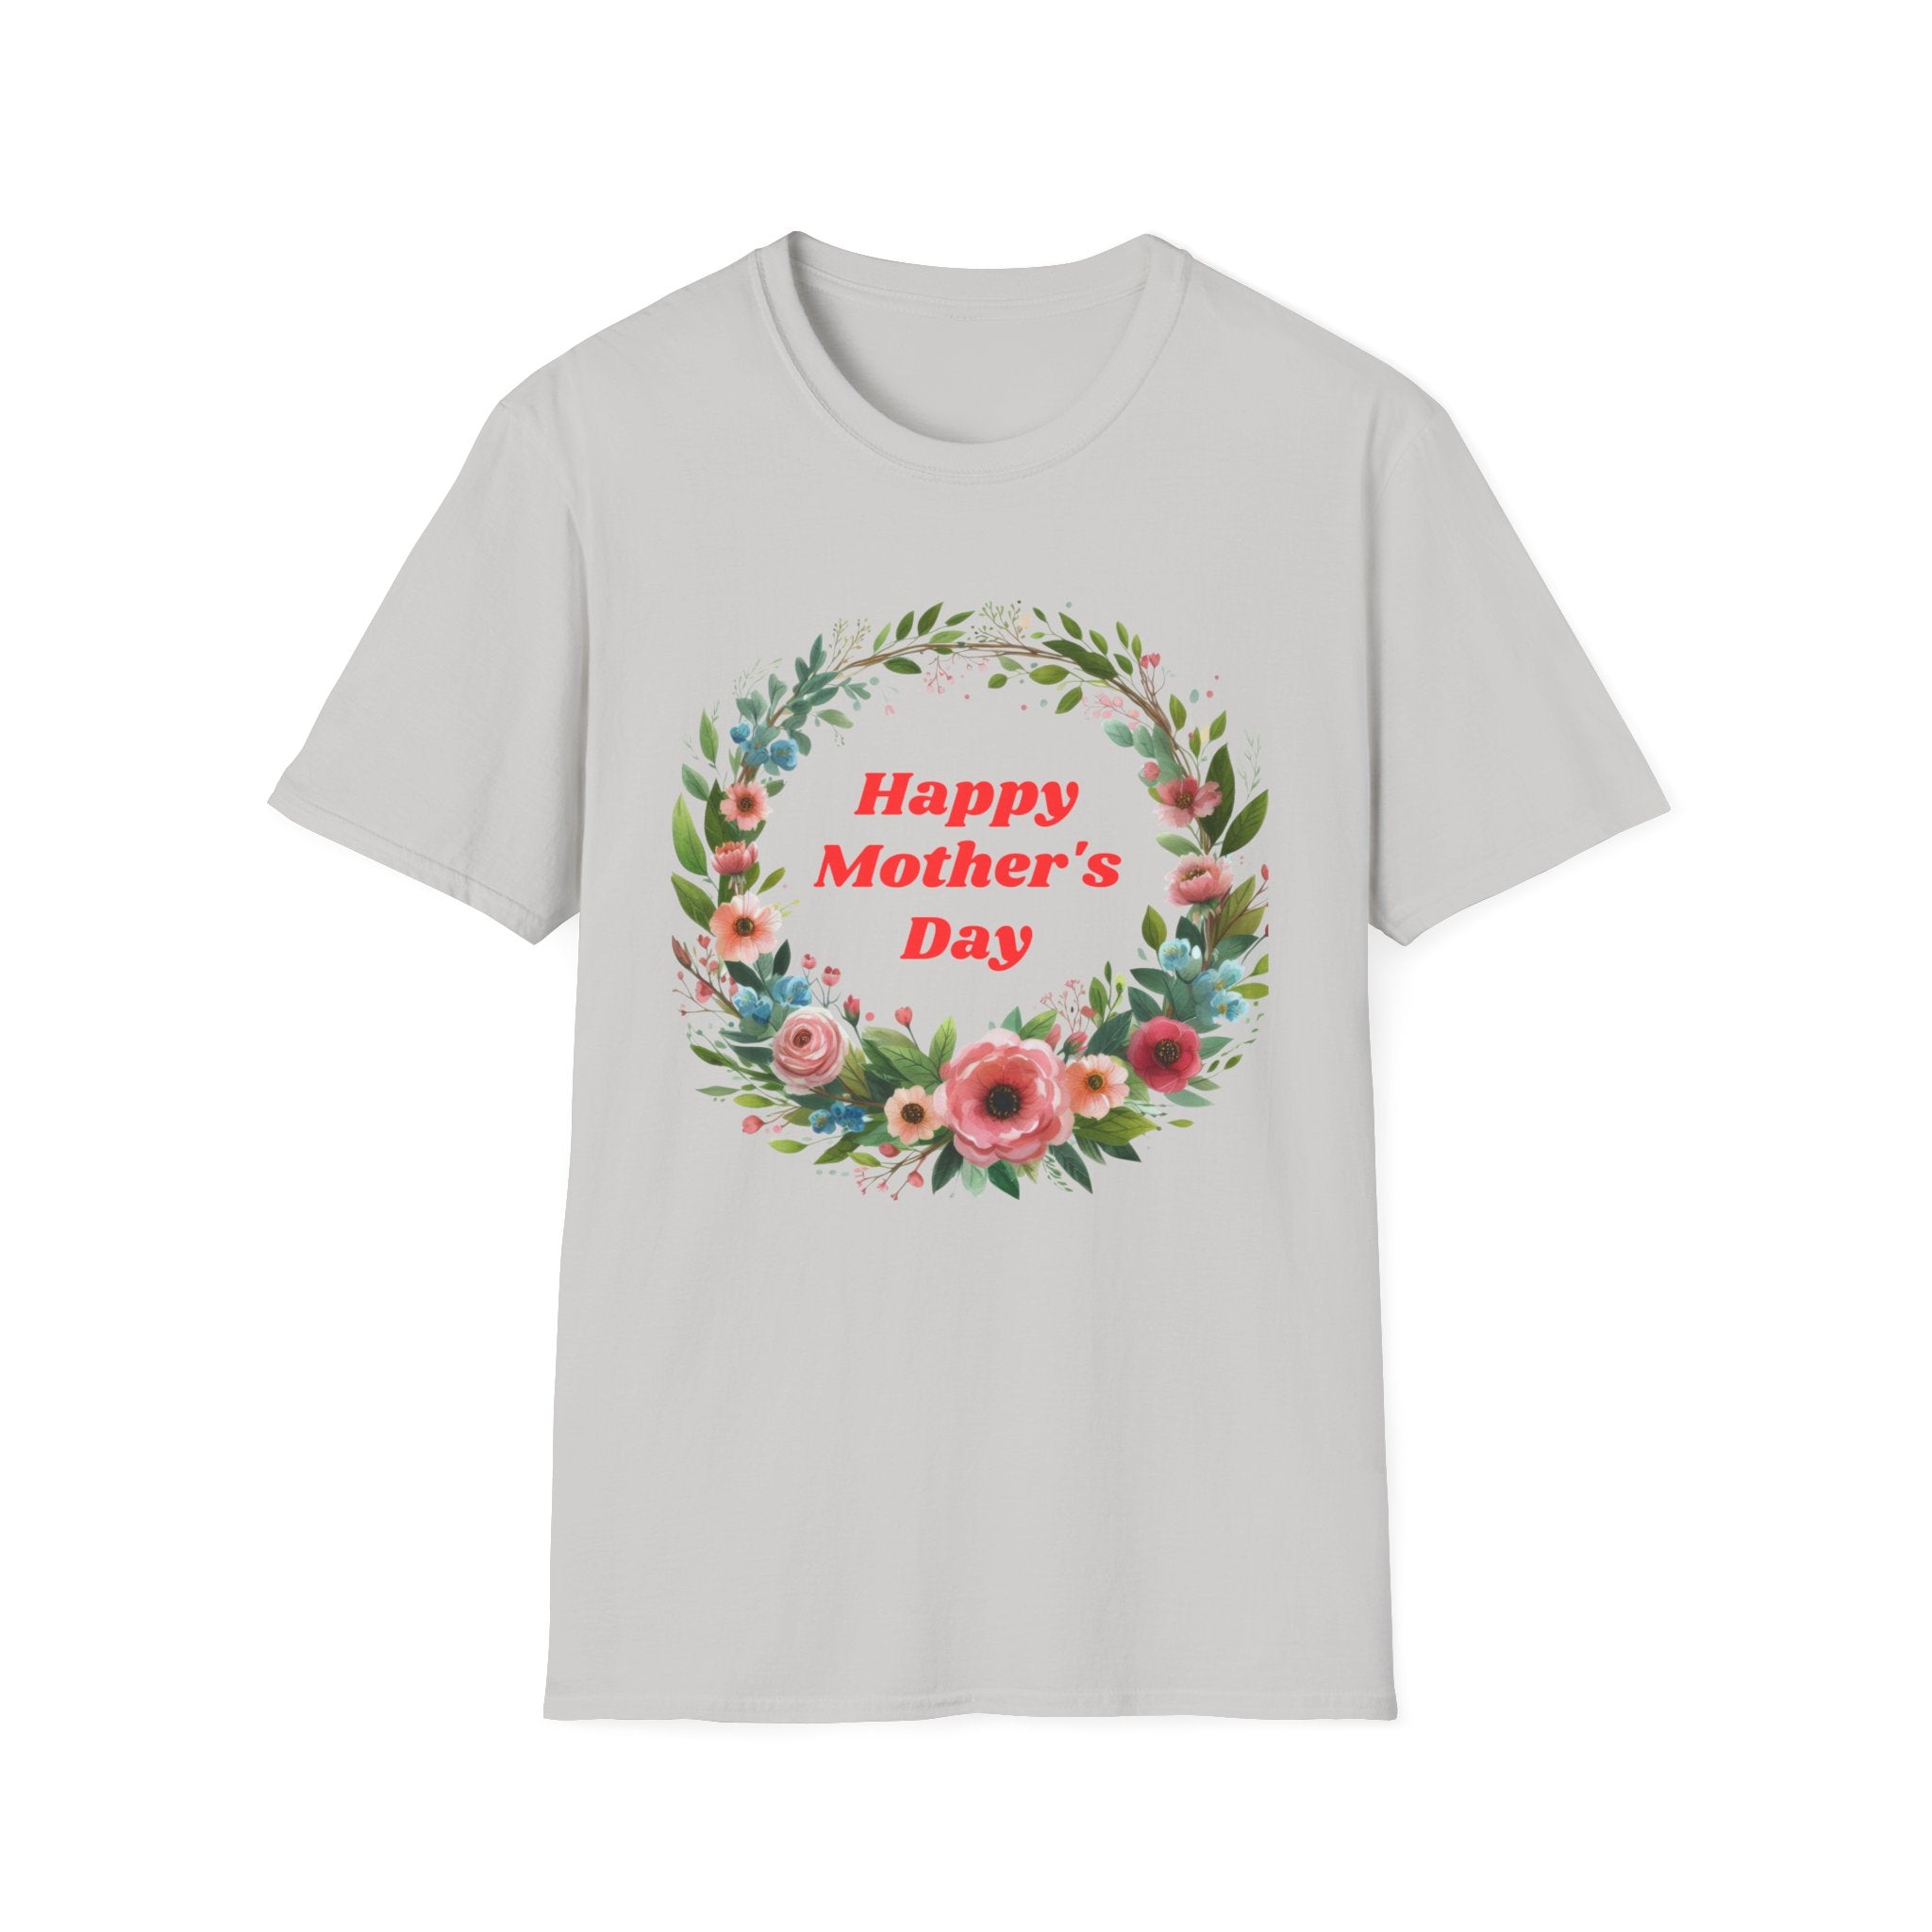 Happy Mother's Day Unisex Softstyle T-Shirt, Gift for Mom, Mother's Day gift